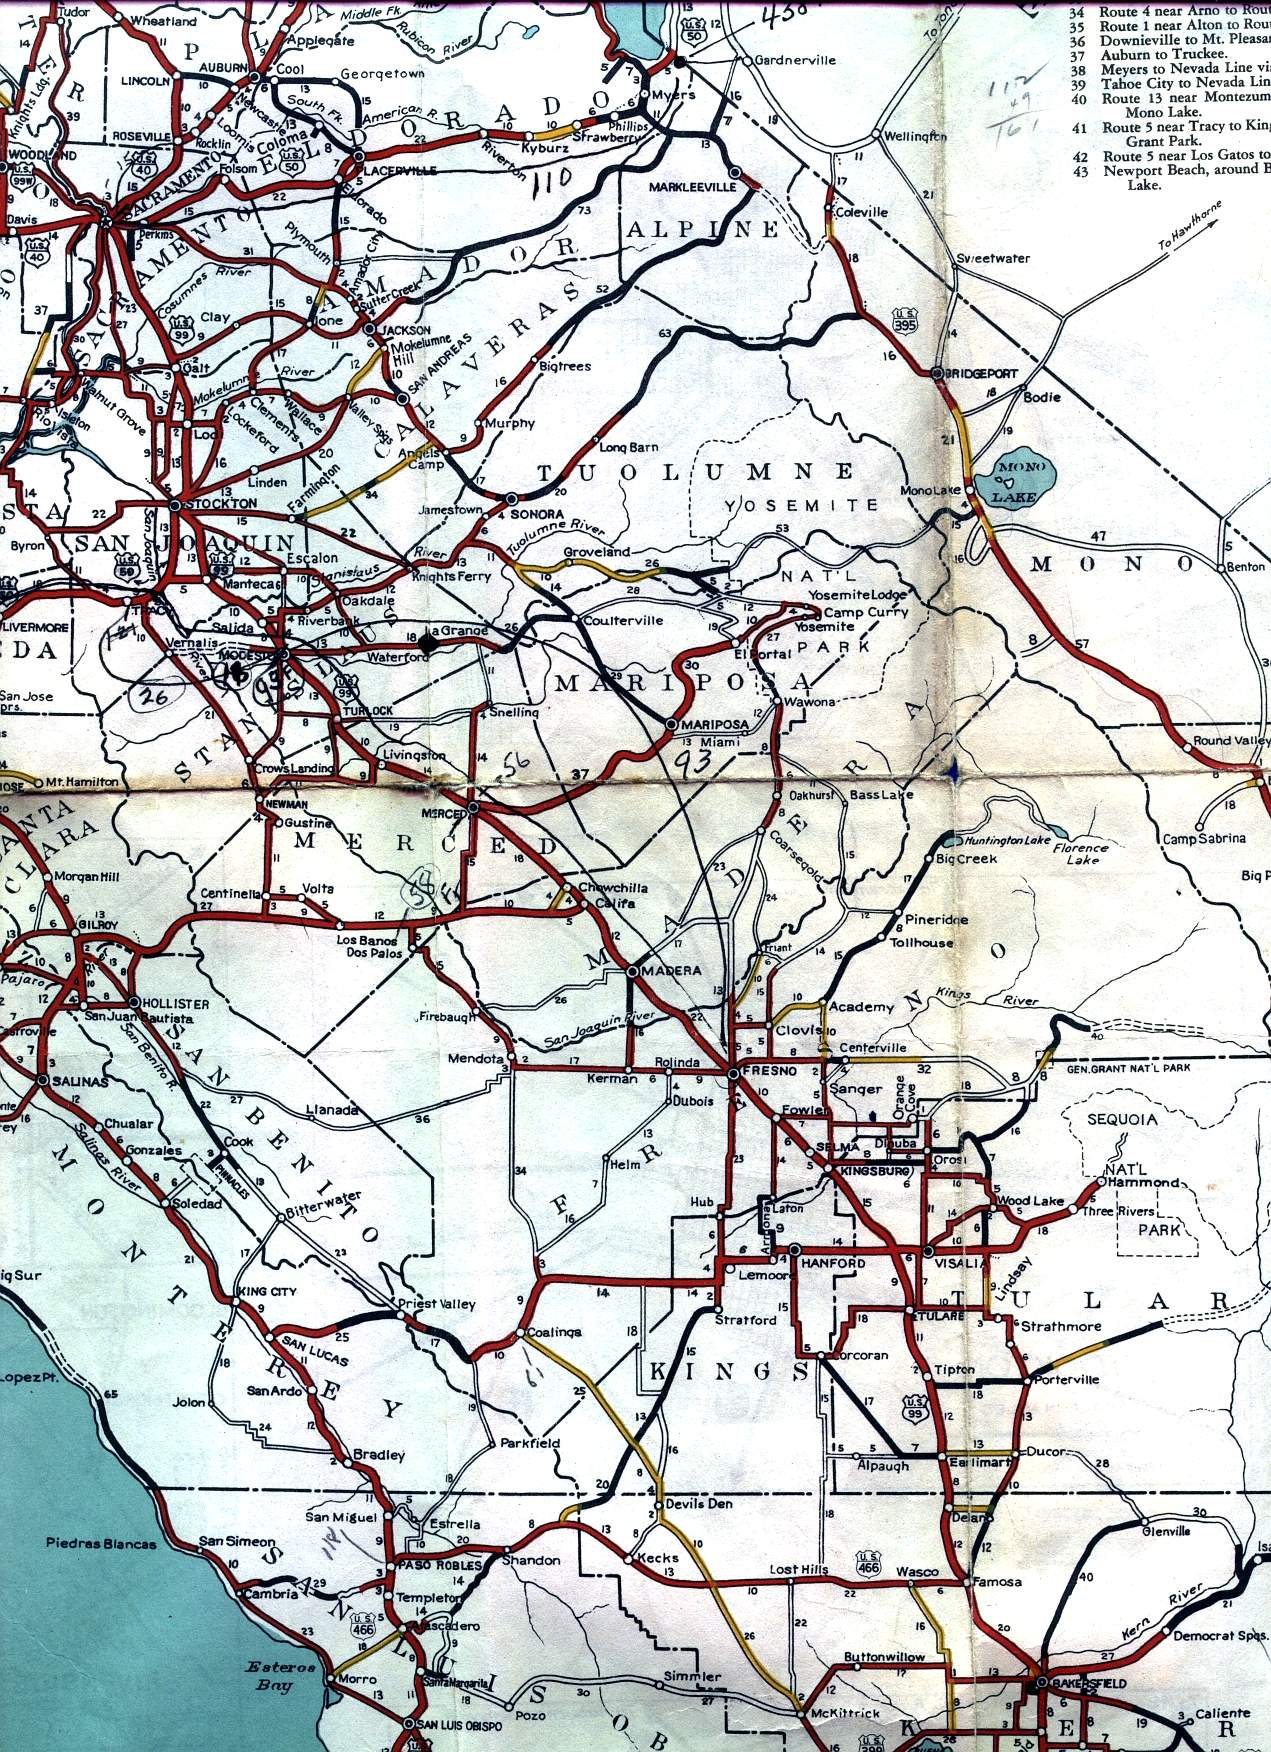 California Road Signs And Sights Gallery: Section Of 1936 Official - Central California Road Map